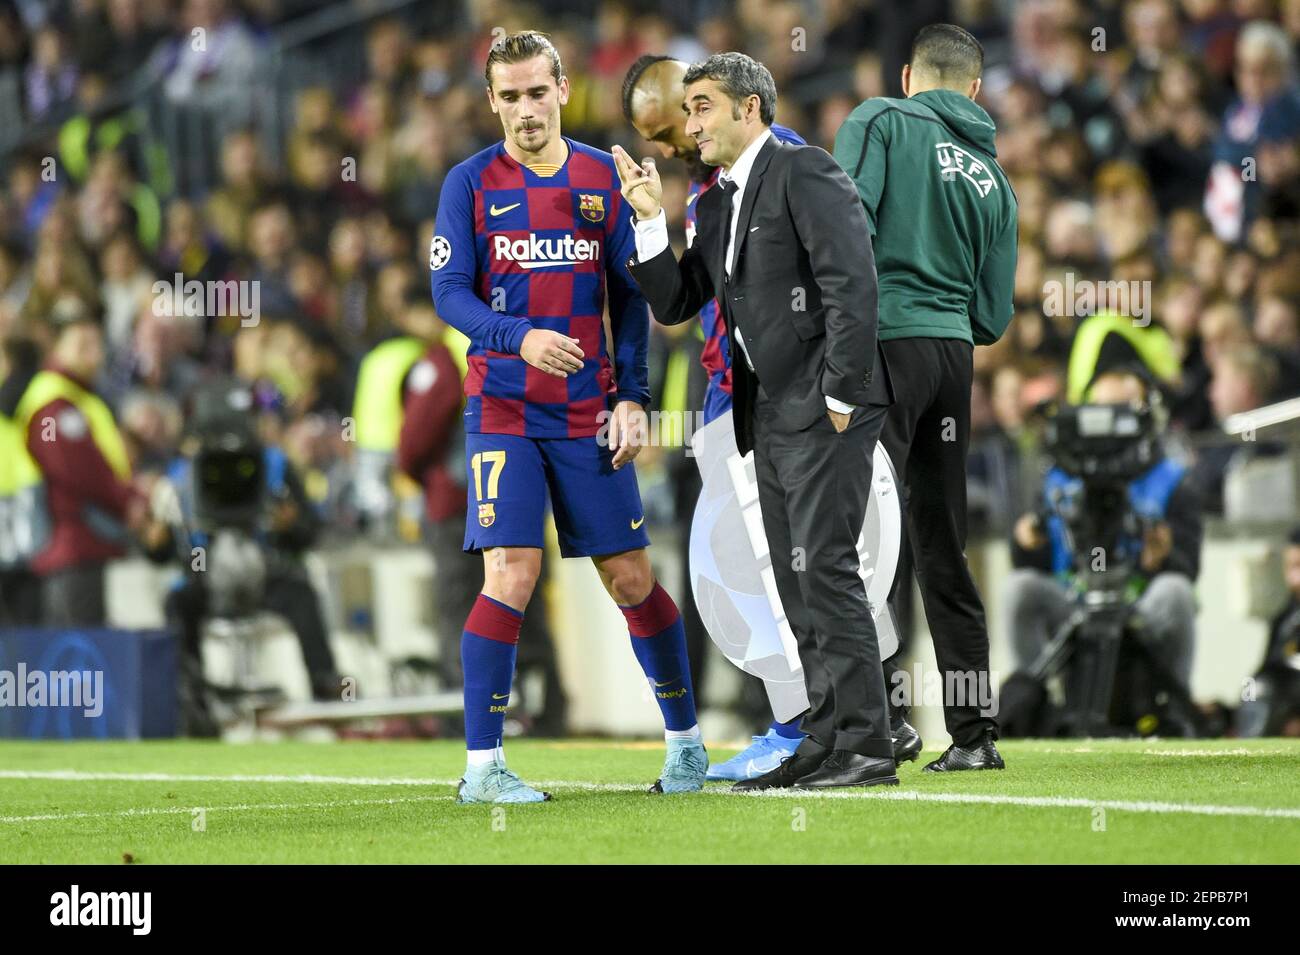 Barcelona Coach Ernesto Valverde talks to Antoine Griezmann of Barcelona during the UEFA Champions League Group F match between FC Barcelona and Borussia Dortmund at Camp Nou Stadium in Barcelona, Spain on November 27, 2019 (Photo by Andrew Surma / SIPA USA) Stock Photo